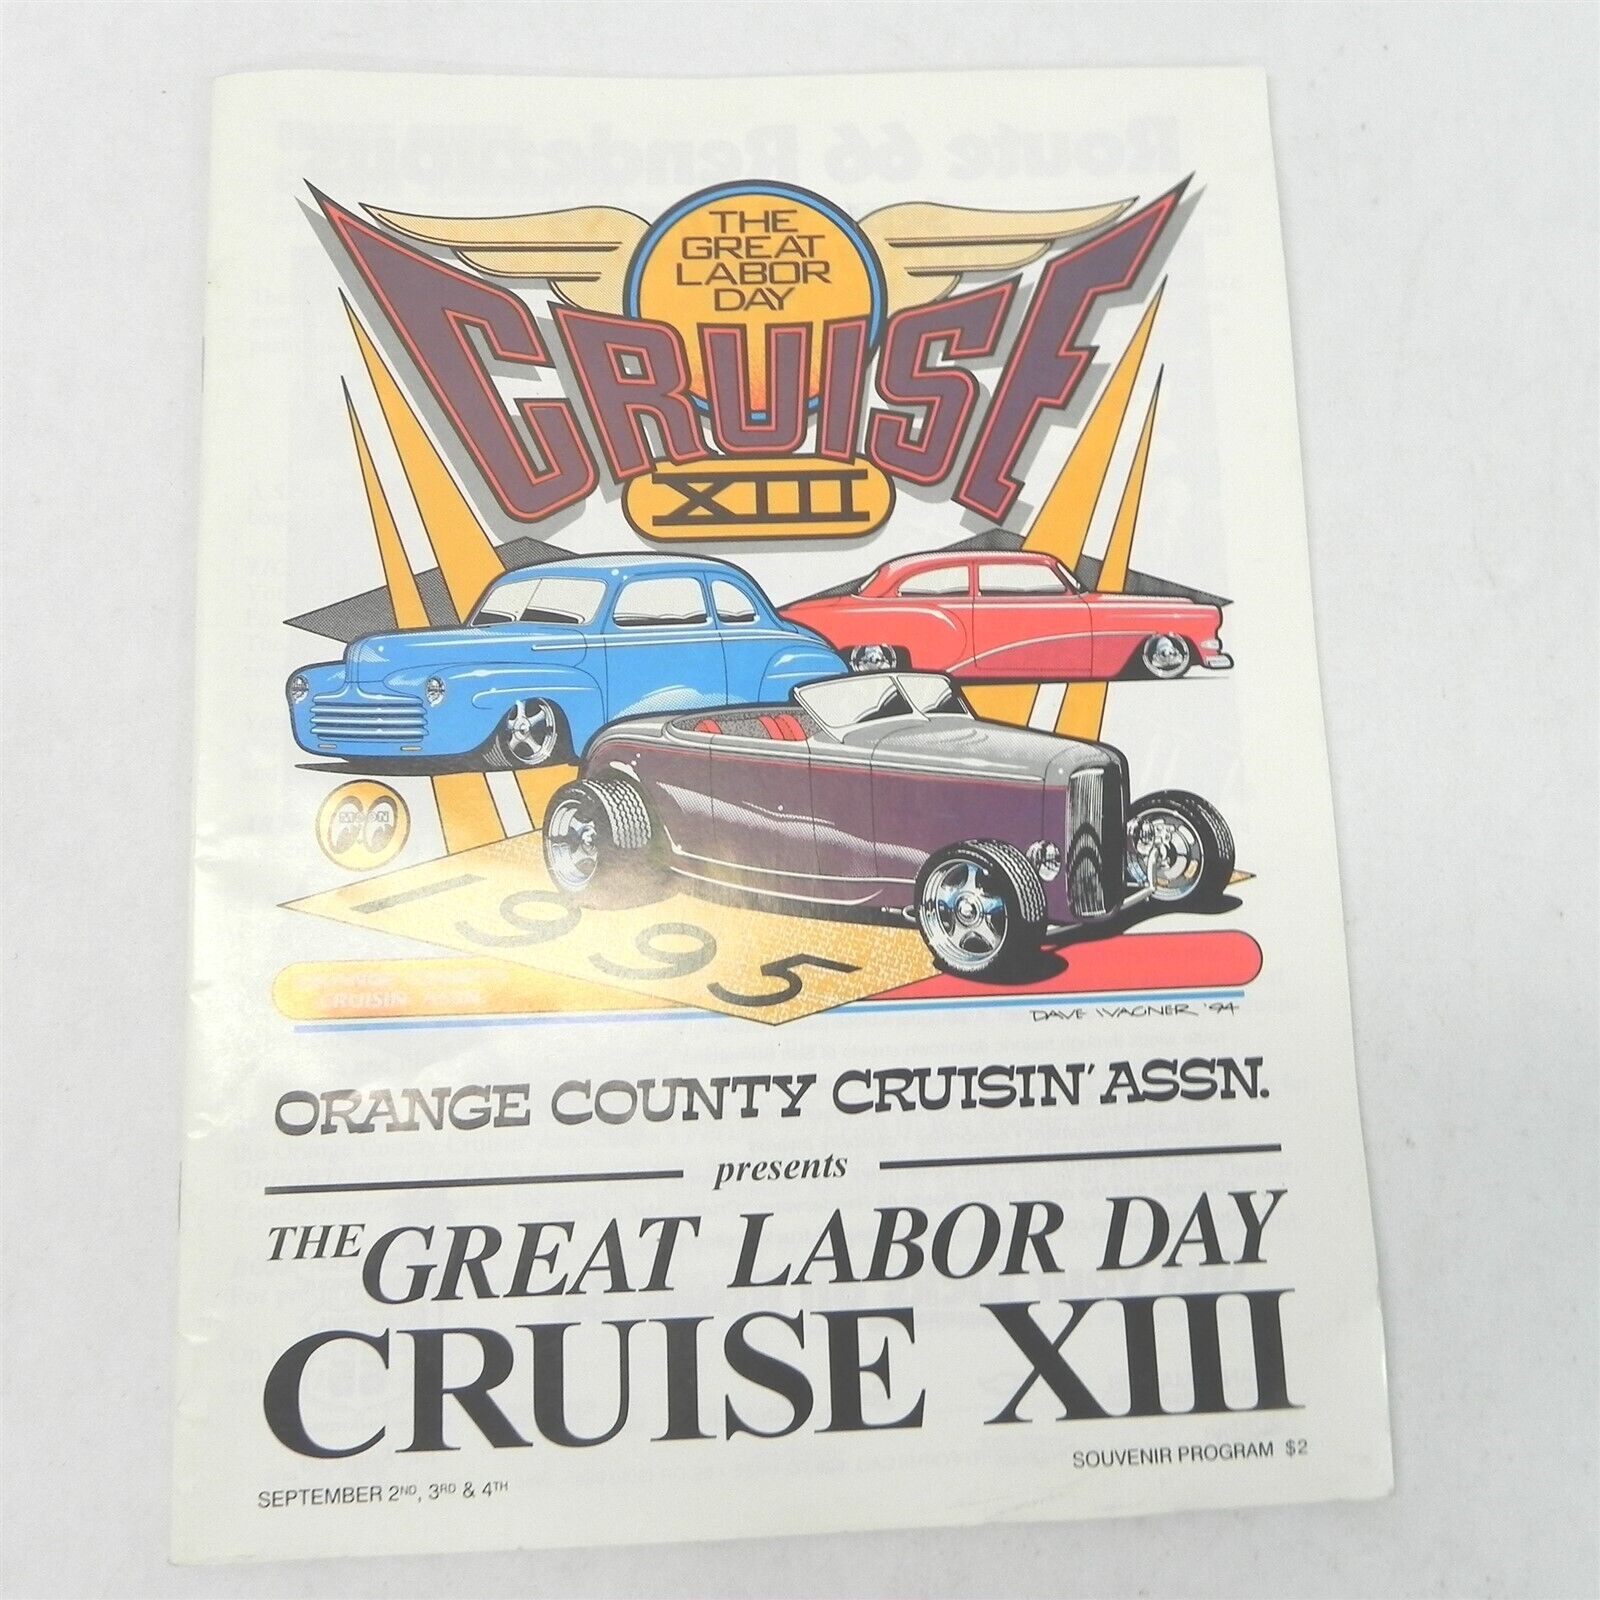 1995 THE GREAT LABOR DAY CRUISE IN ORANGE COUNTY CALIFORNIA OFFICIAL PROGRAM